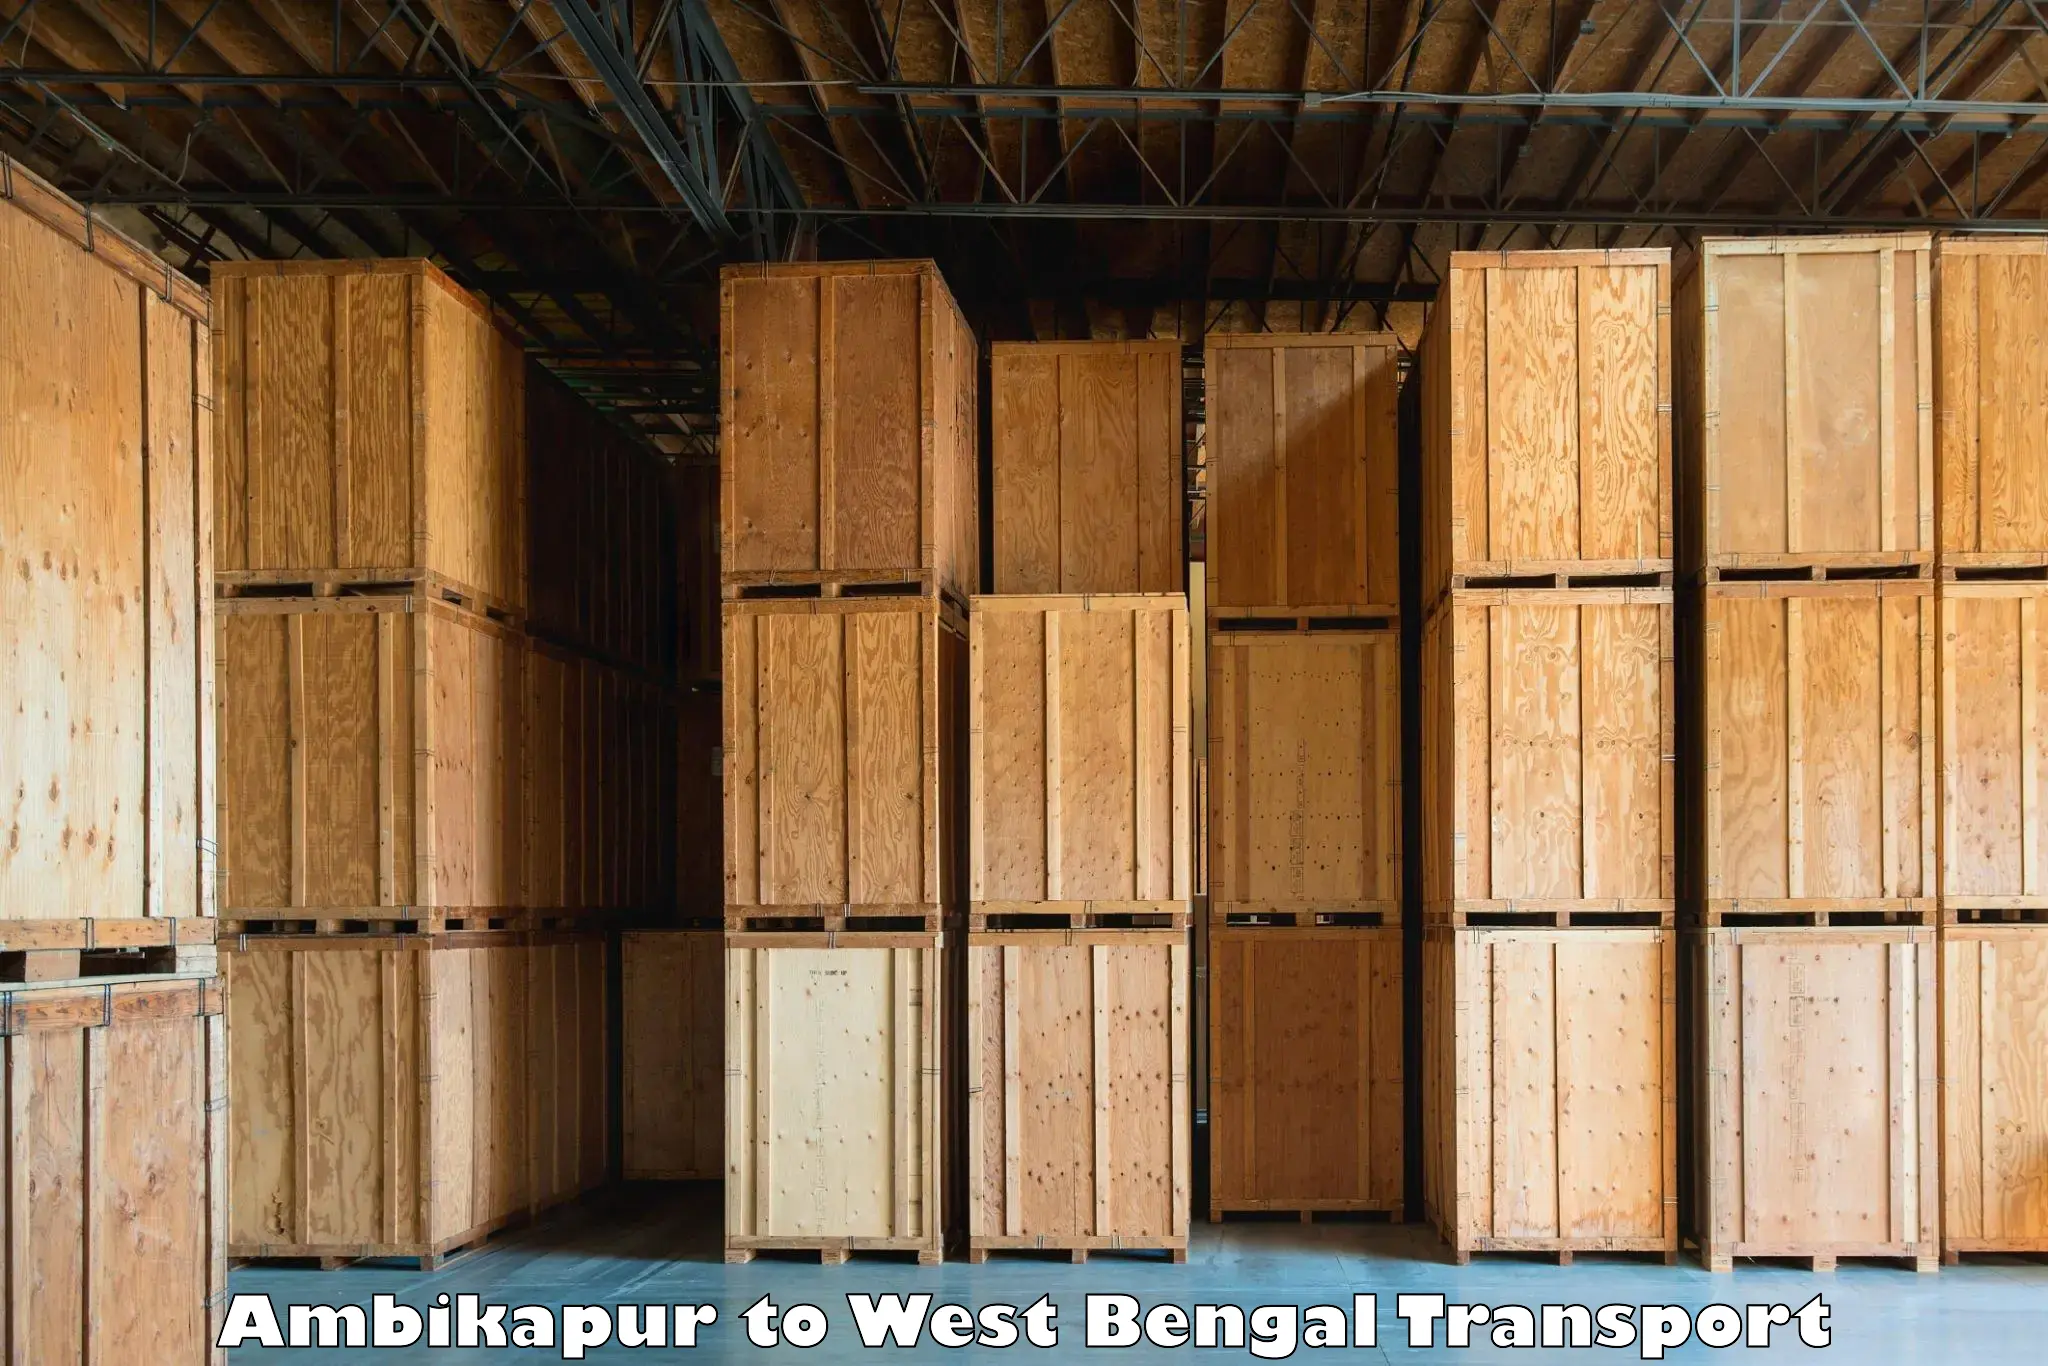 Daily transport service Ambikapur to West Bengal